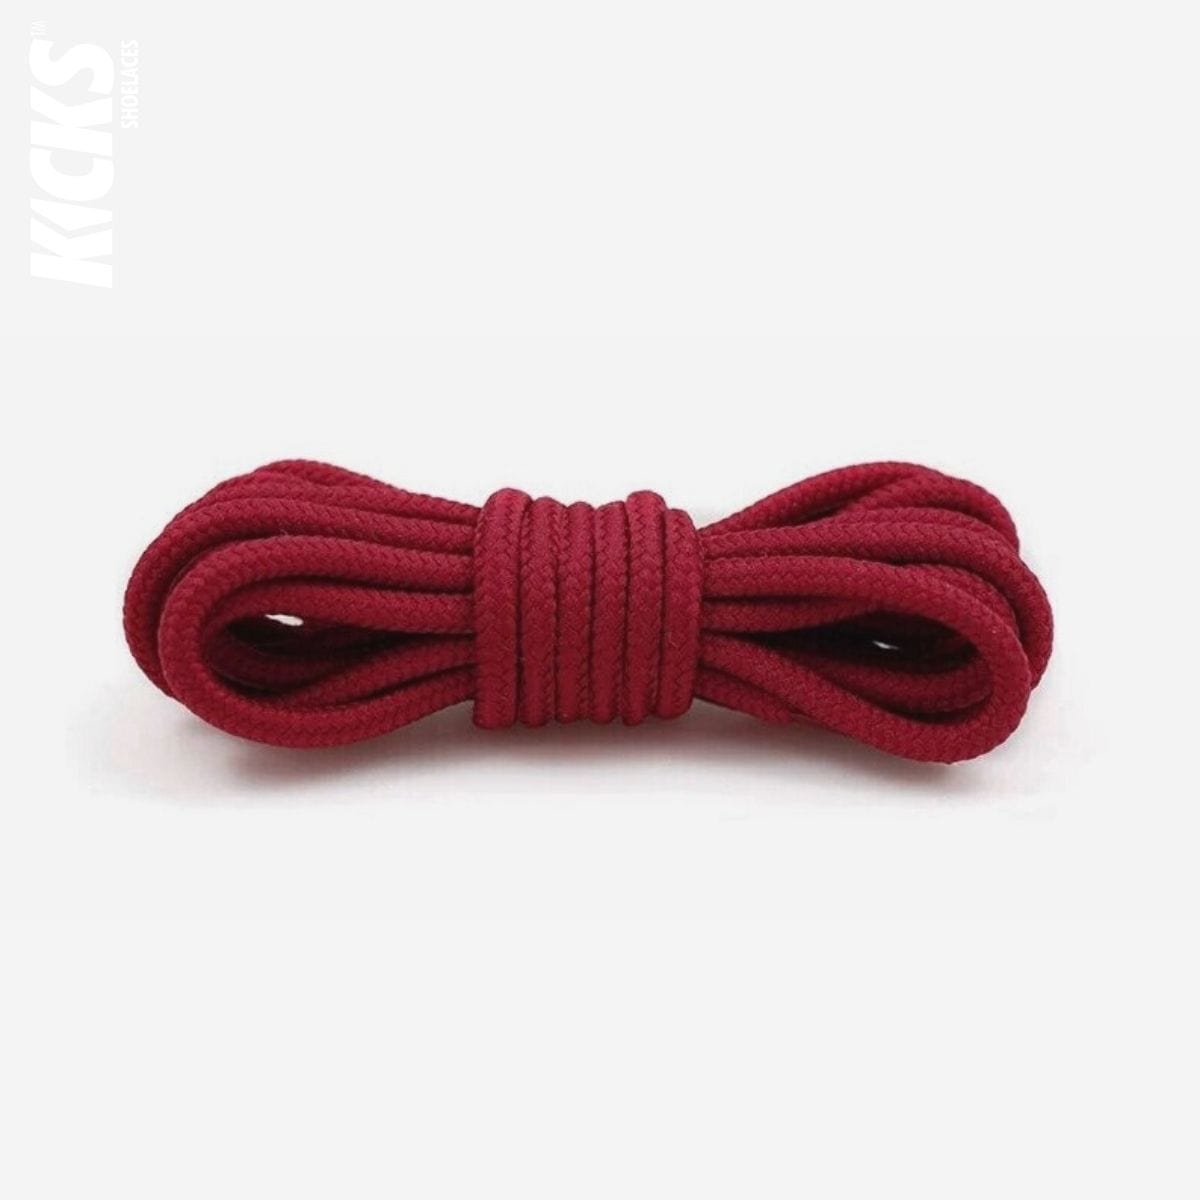 colored-shoelaces-for-cool-ways-to-tie-shoe-with-wine-red-laces